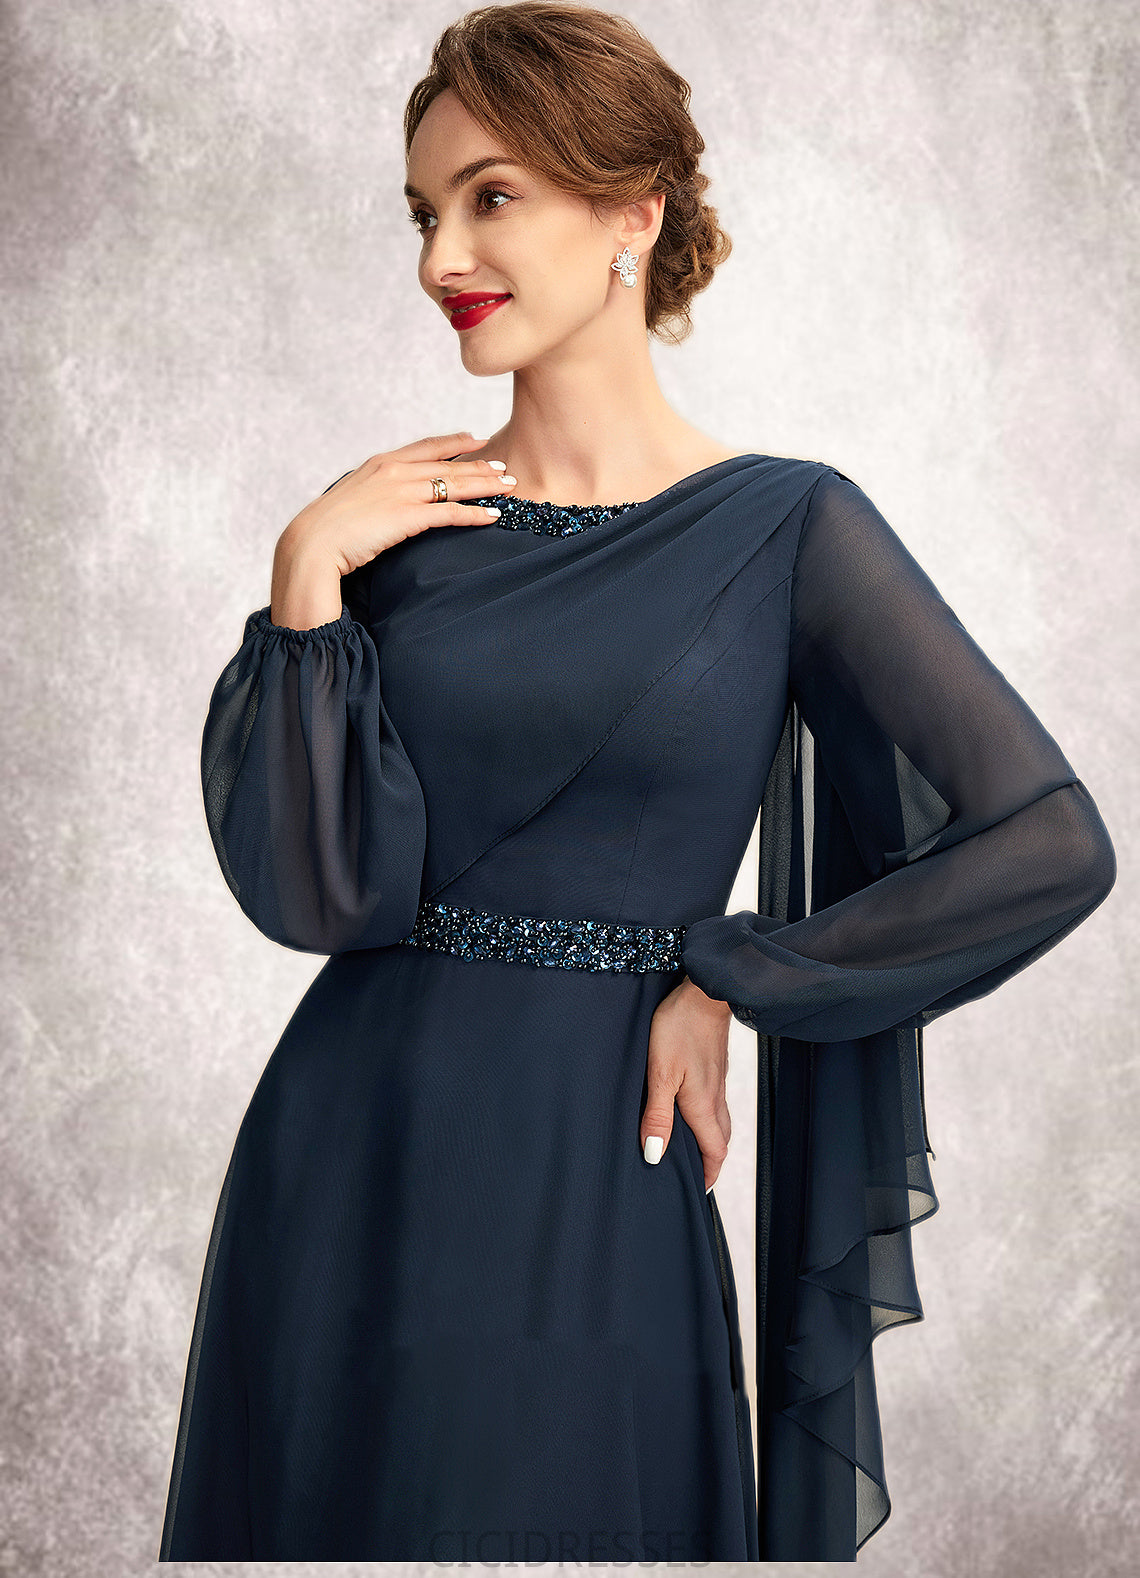 Addisyn A-Line Scoop Neck Tea-Length Chiffon Mother of the Bride Dress With Beading Sequins CIC8126P0015018